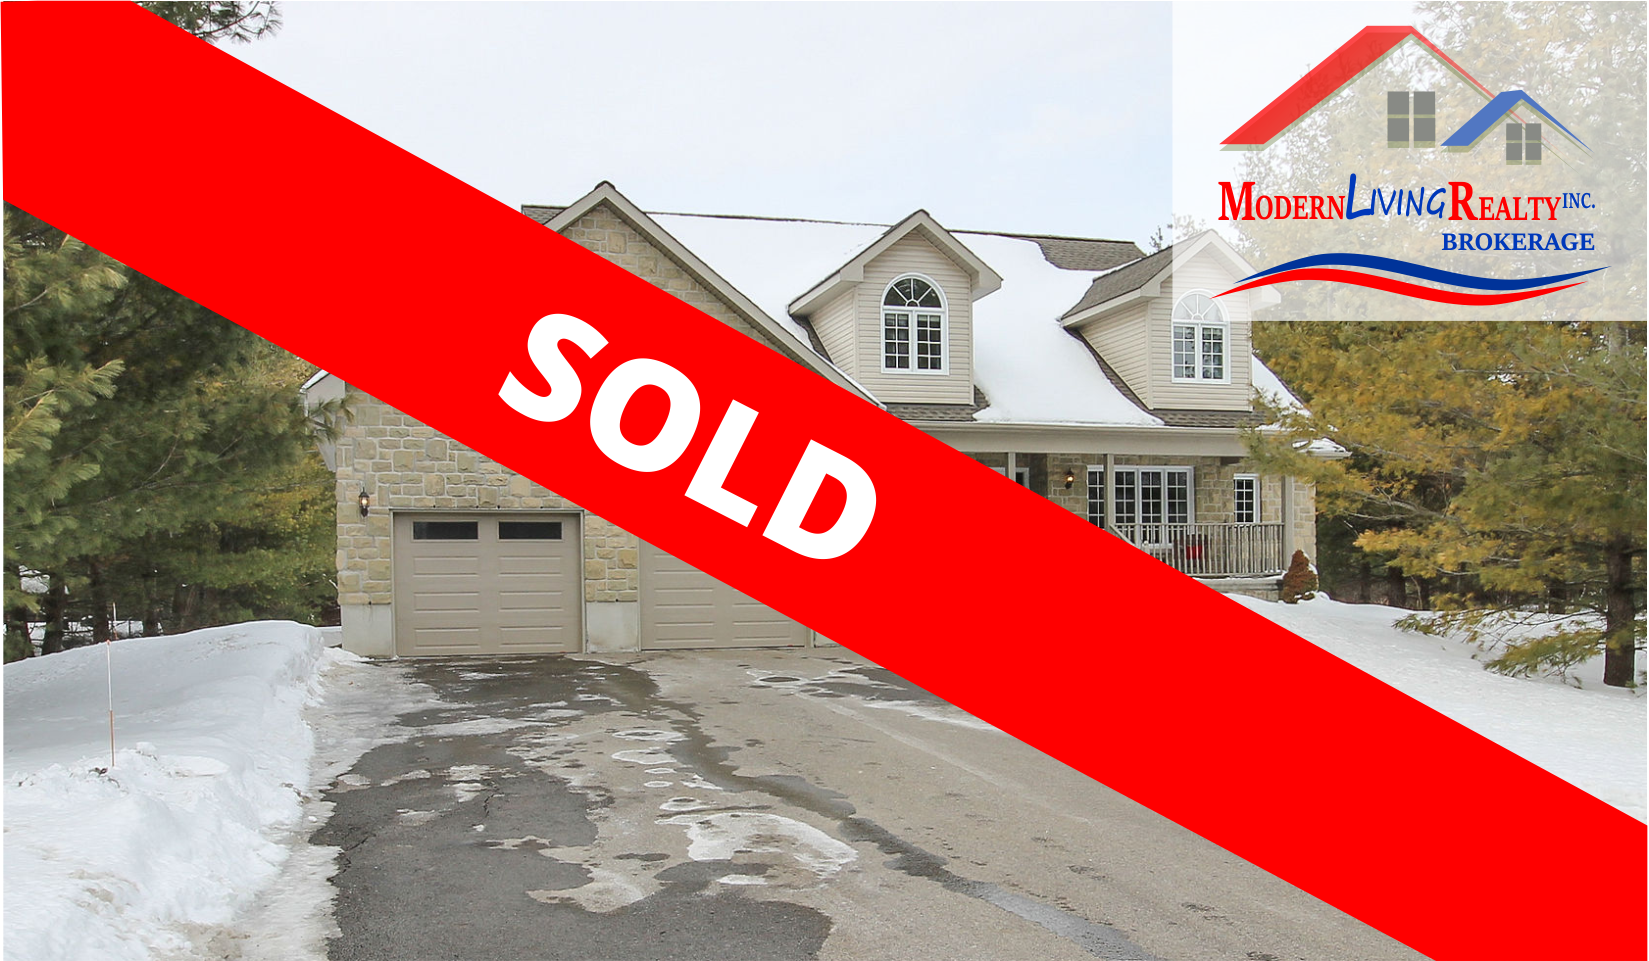 Main Photo: Sold Family Home by Modern Living Realty Brokerage